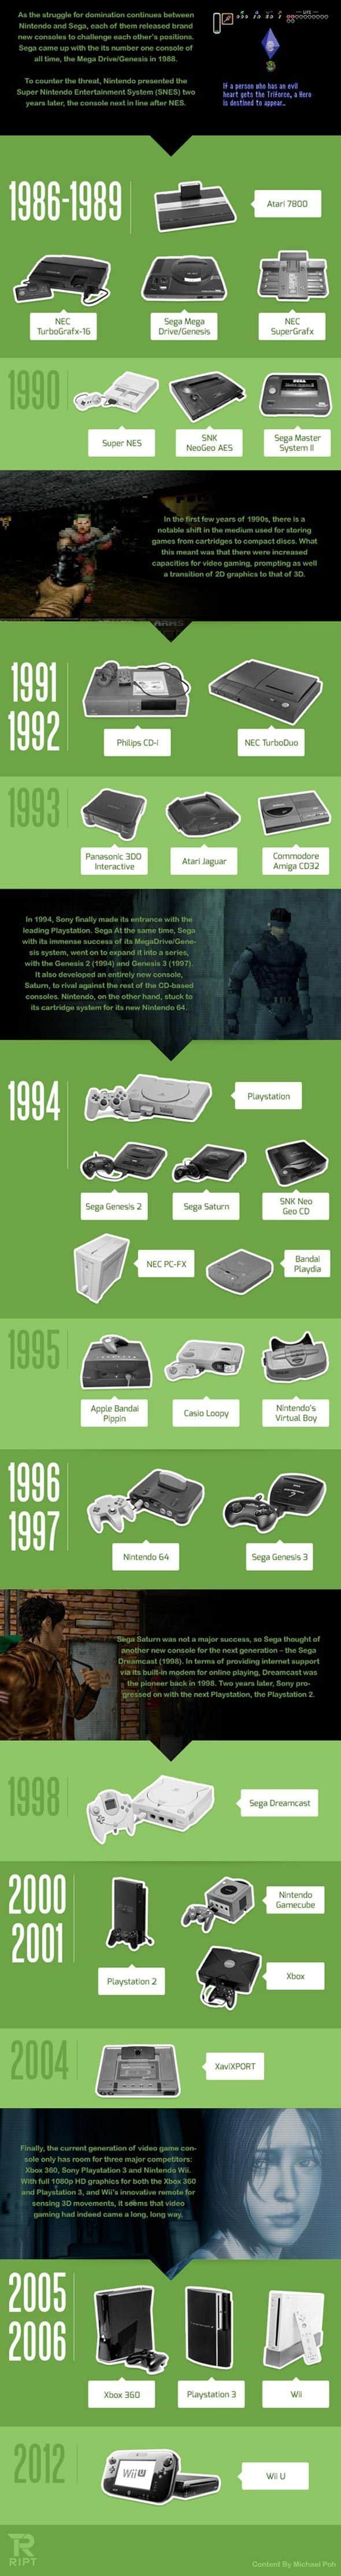 The evolution of game consoles